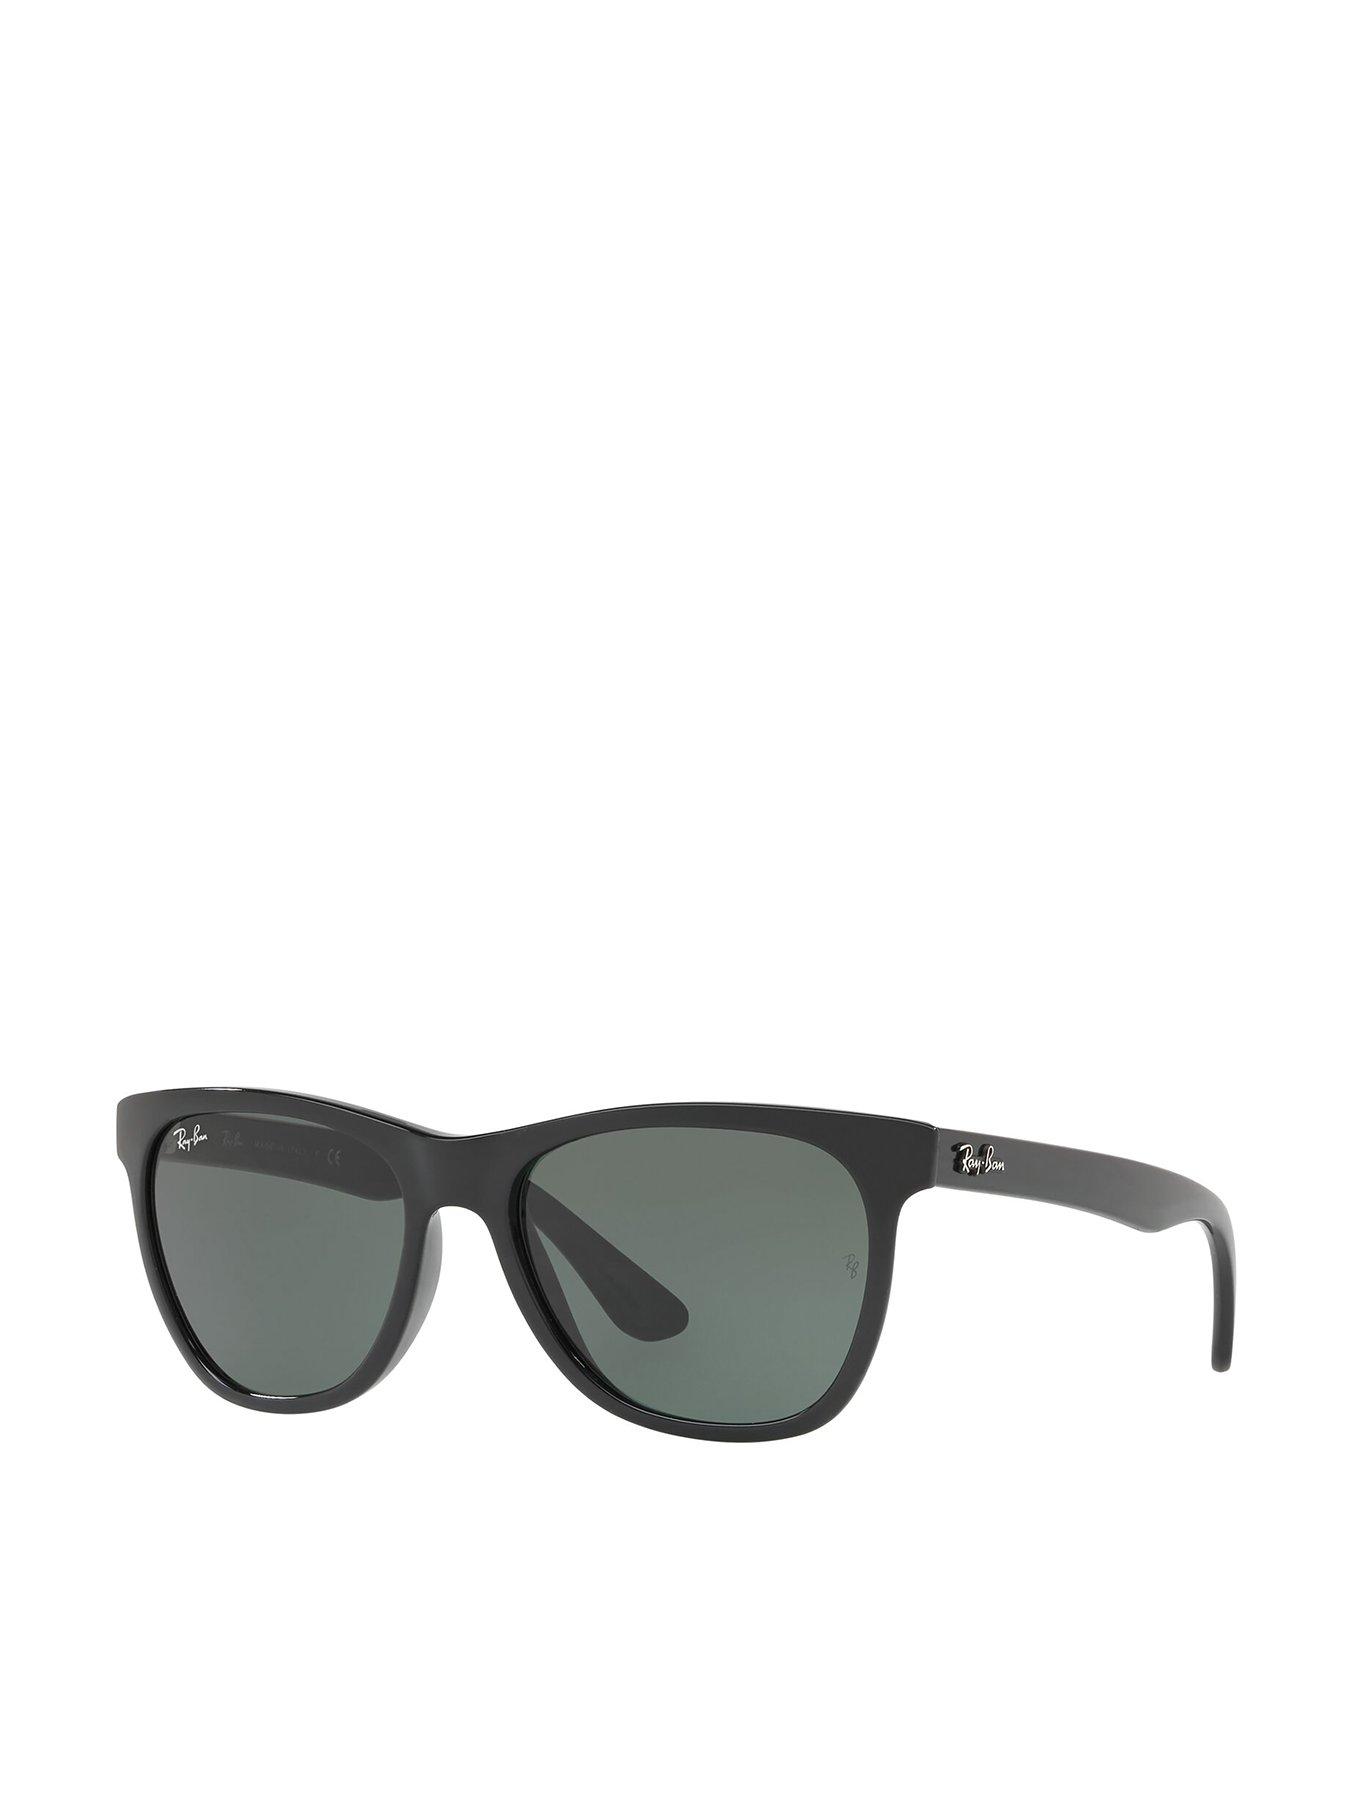 Ray-Ban Rb4184 Square Sunglasses 